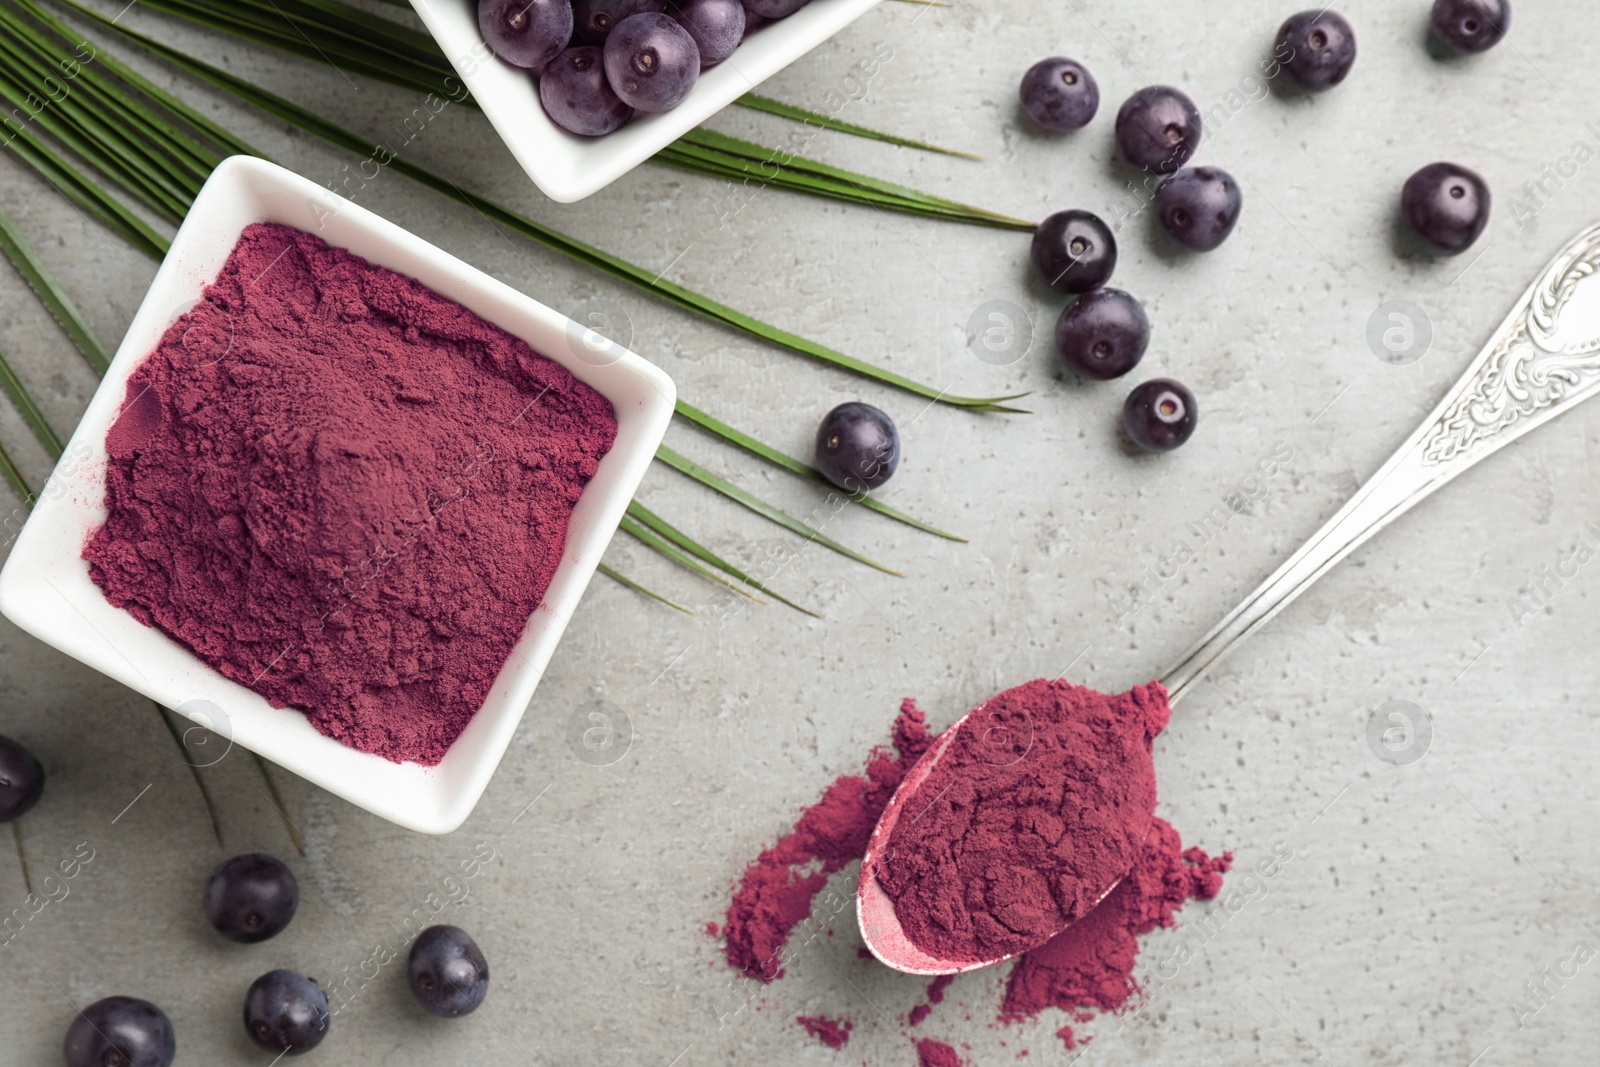 Photo of Acai powder and berries on grey background, flat lay